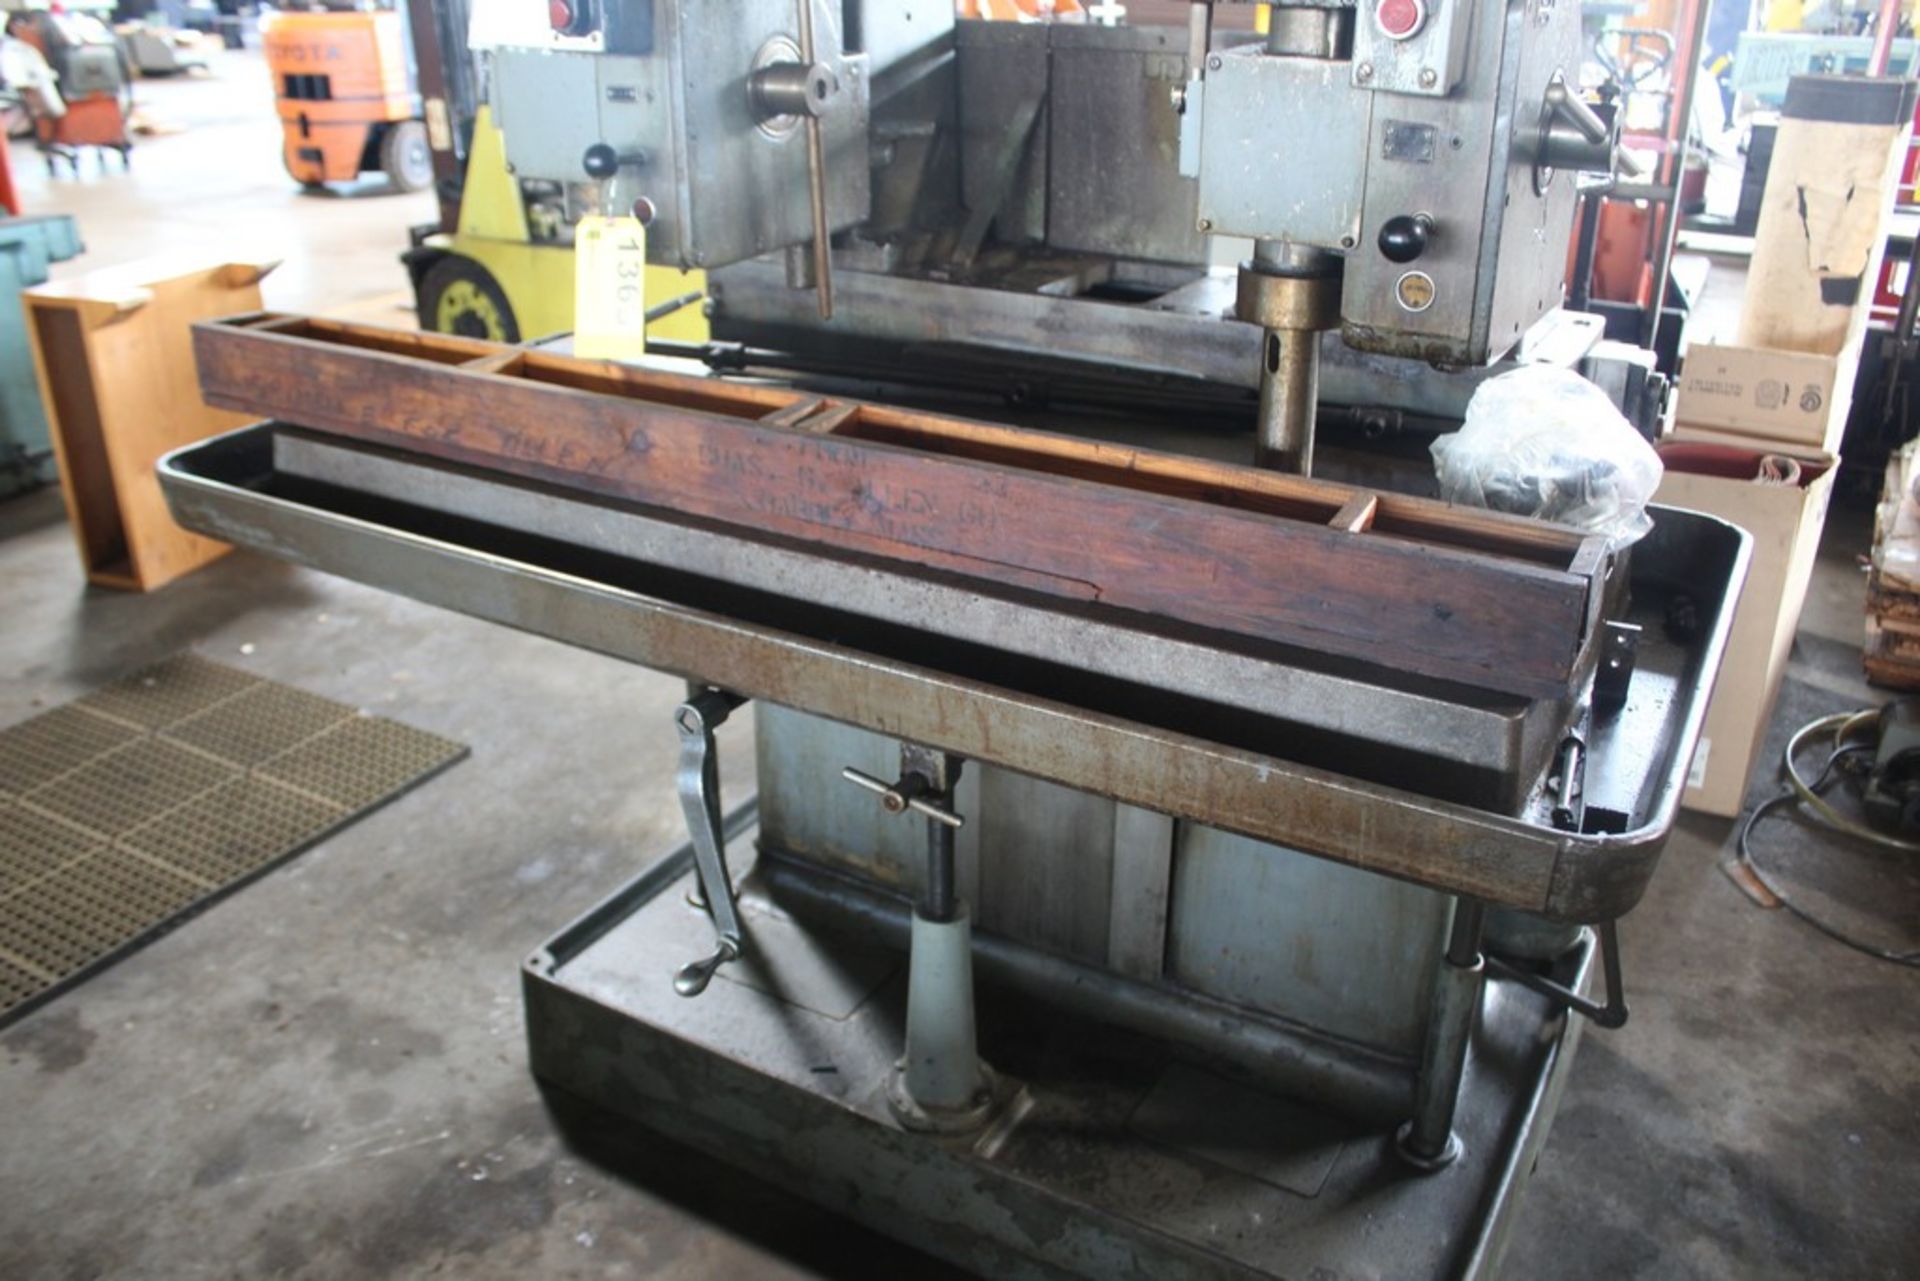 24" 2 SPINDLE ALLEN HEAVY DUTY DRILL PRESS, S/N 34405 (1974), ASSET # 18178 LOADING FEE: $100 - Image 4 of 4